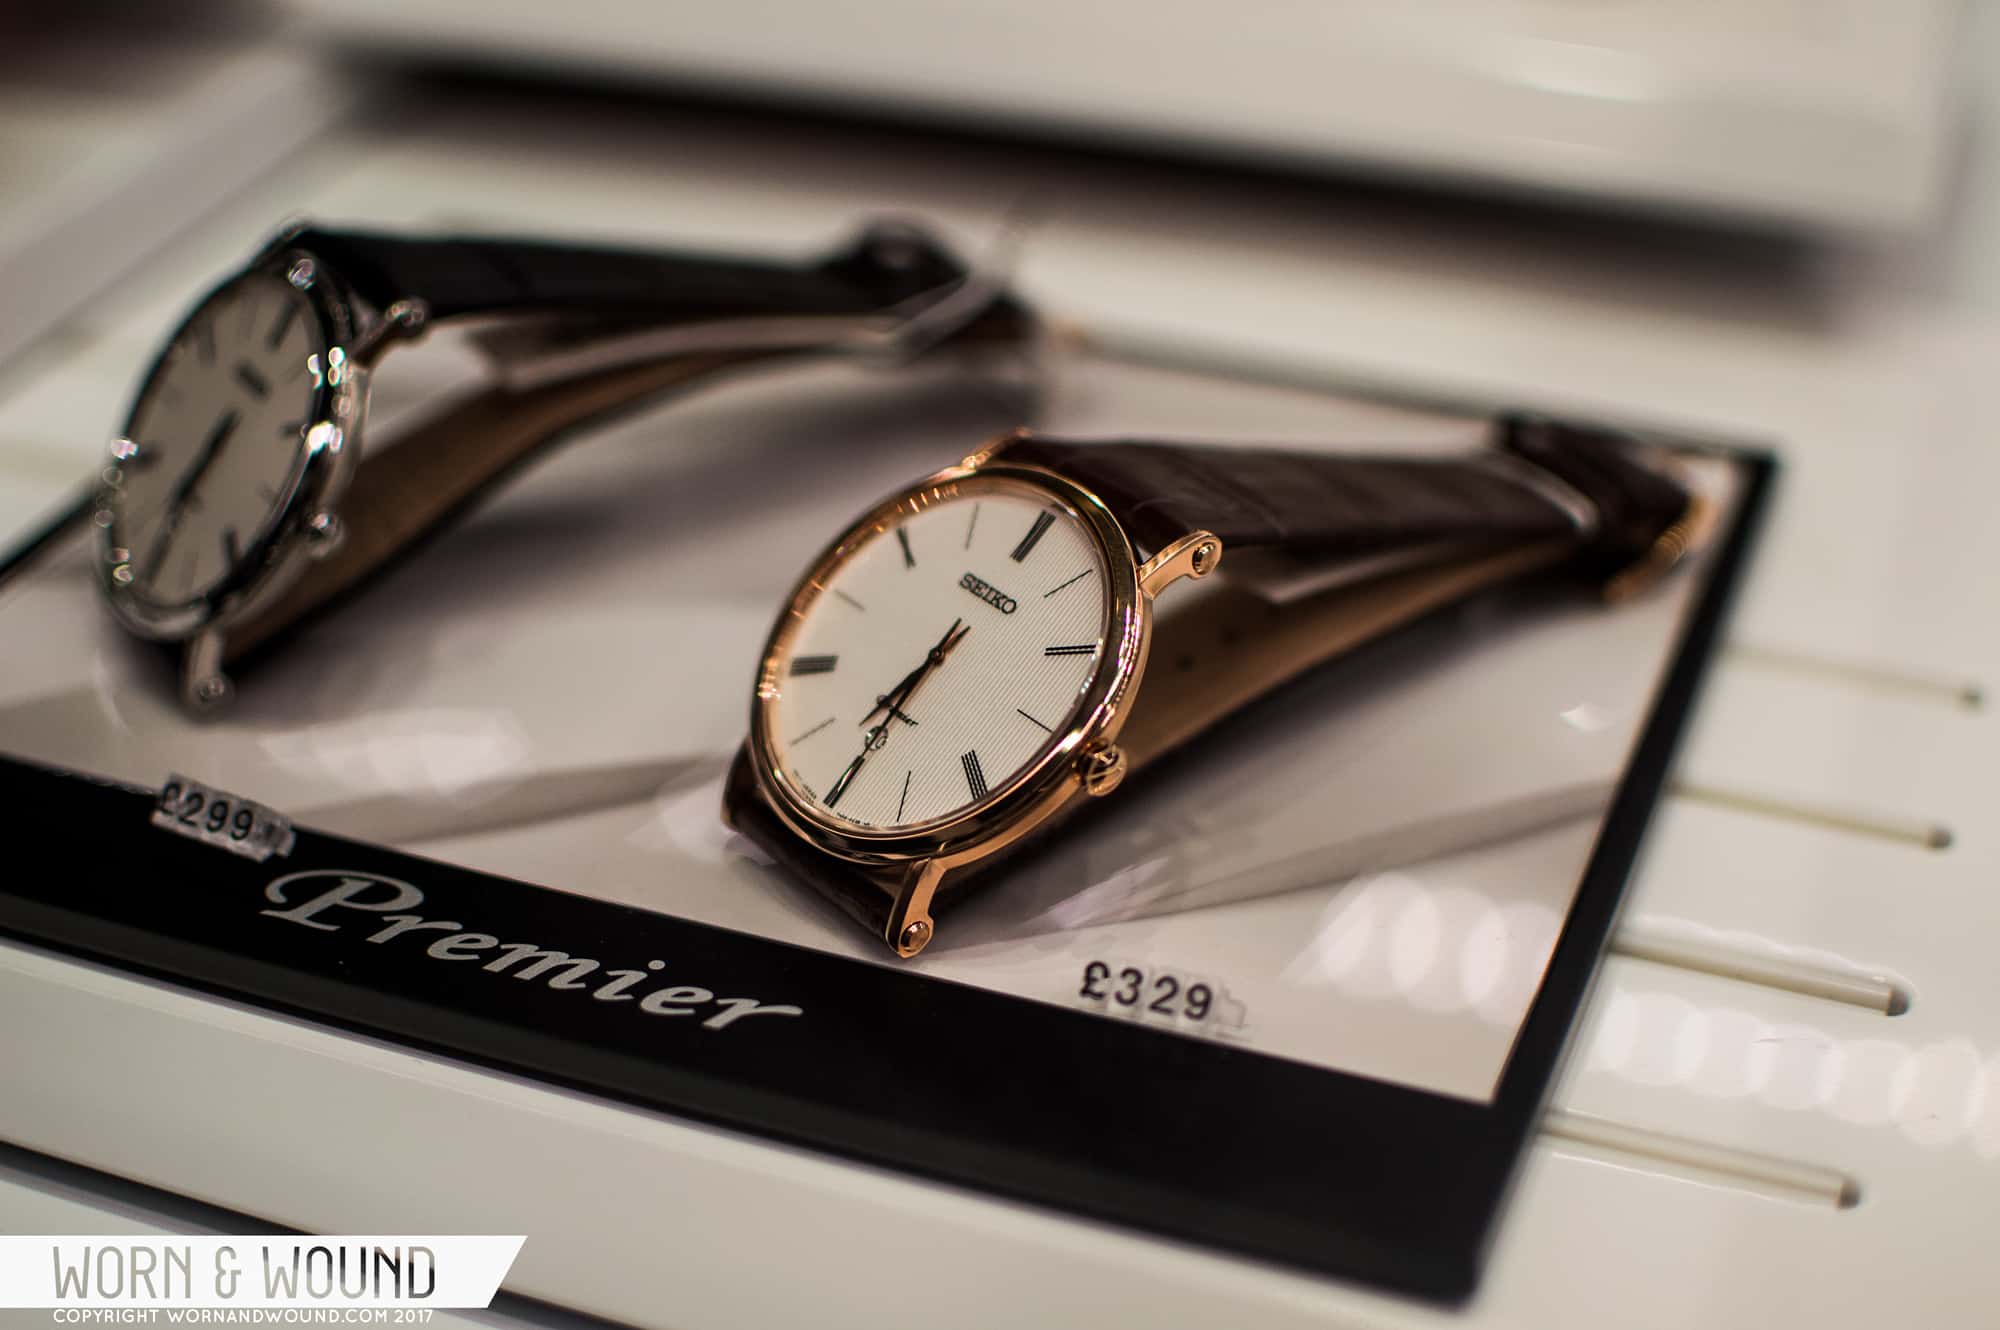 Photo Gallery: Grand Seiko Boutique Opening in London - Worn & Wound